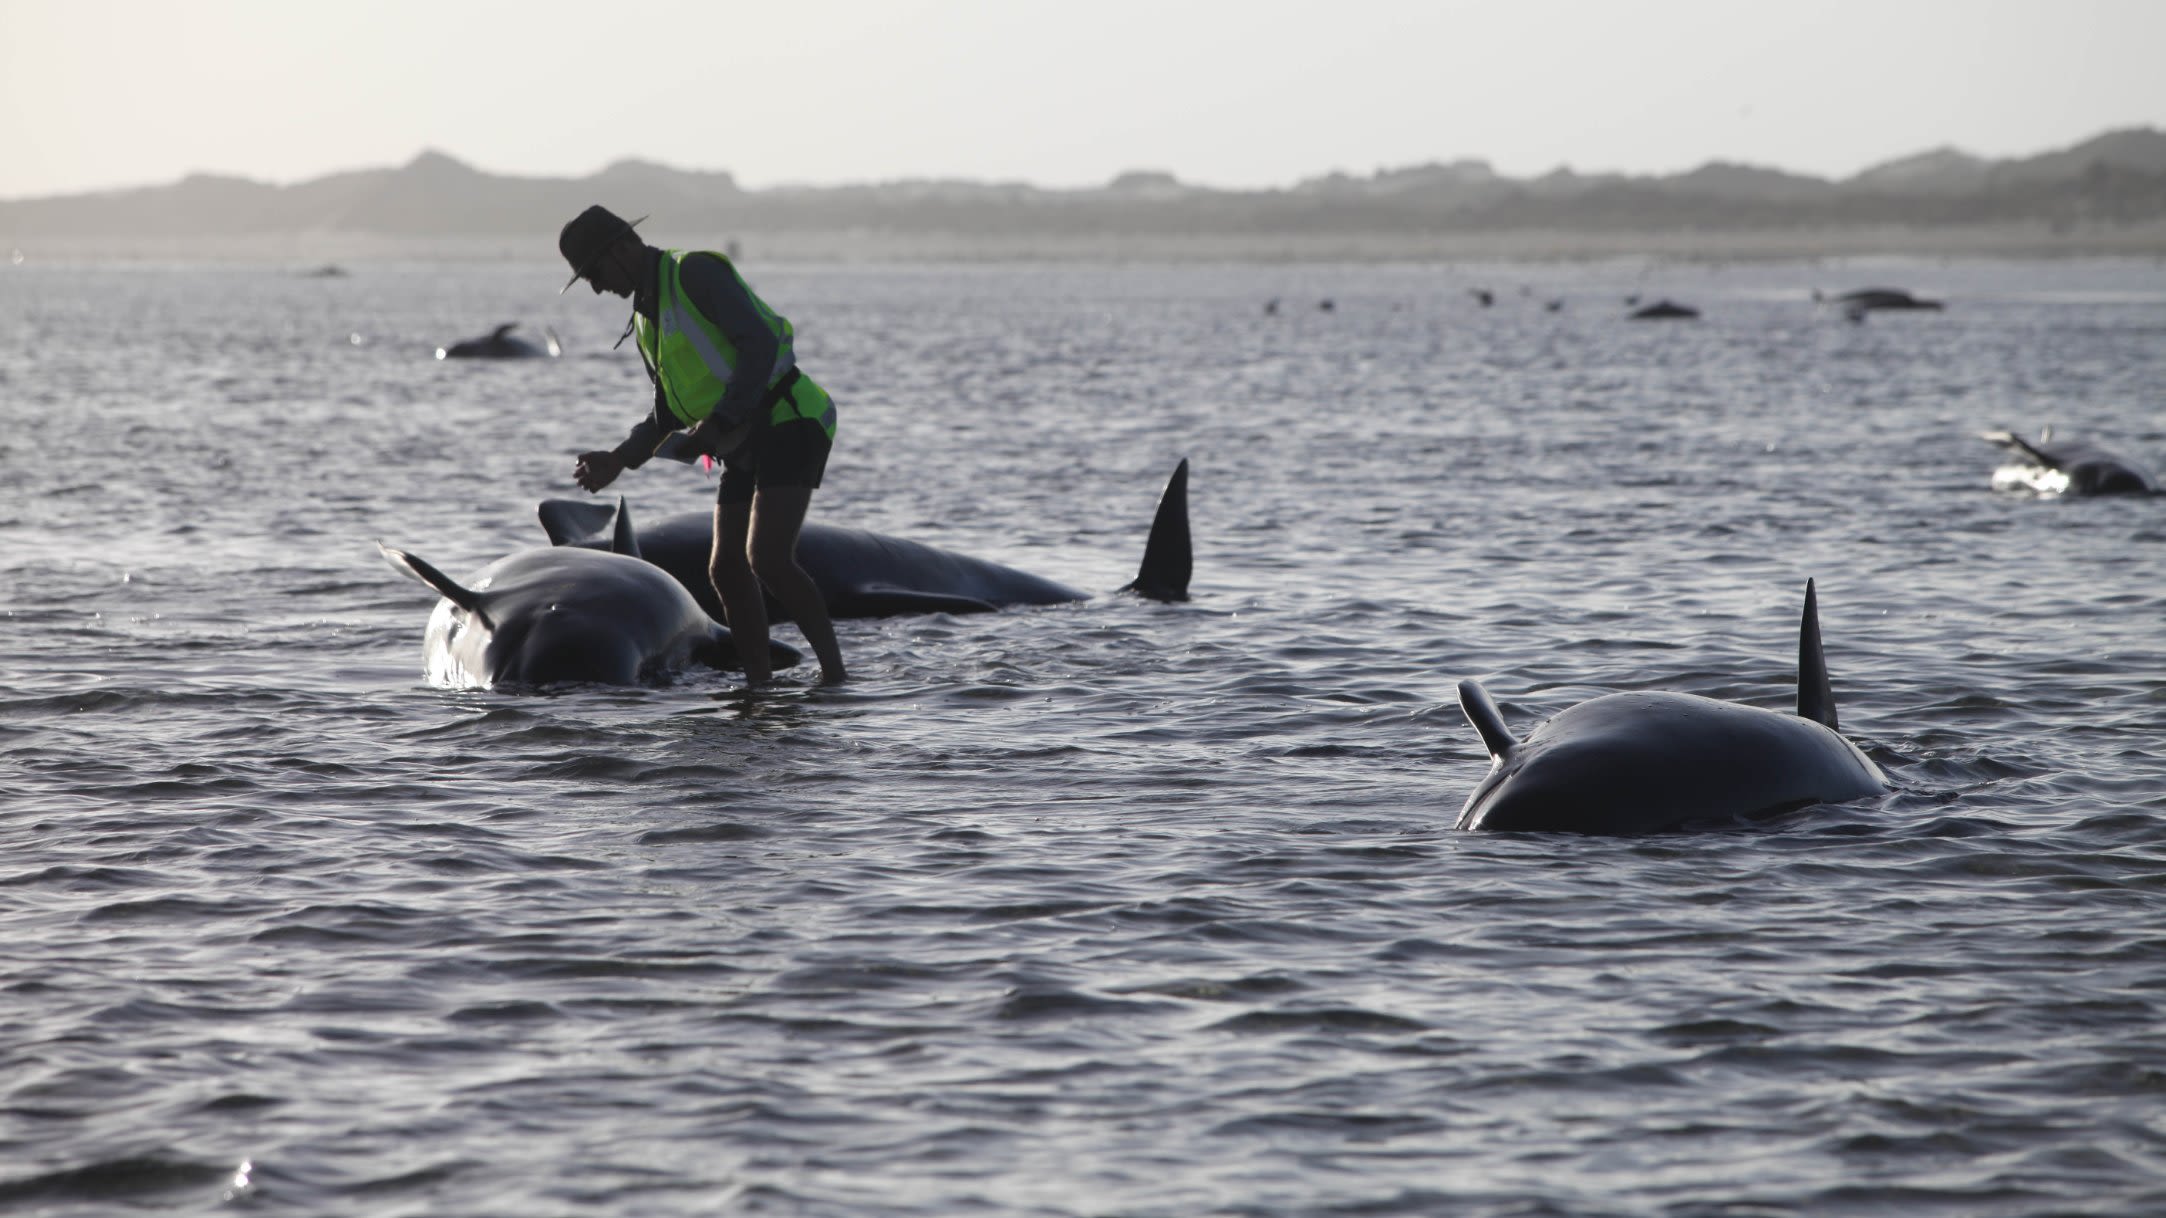 Race to save almost 50 pilot whales after same number die in mass stranding  on WA beach, Whales